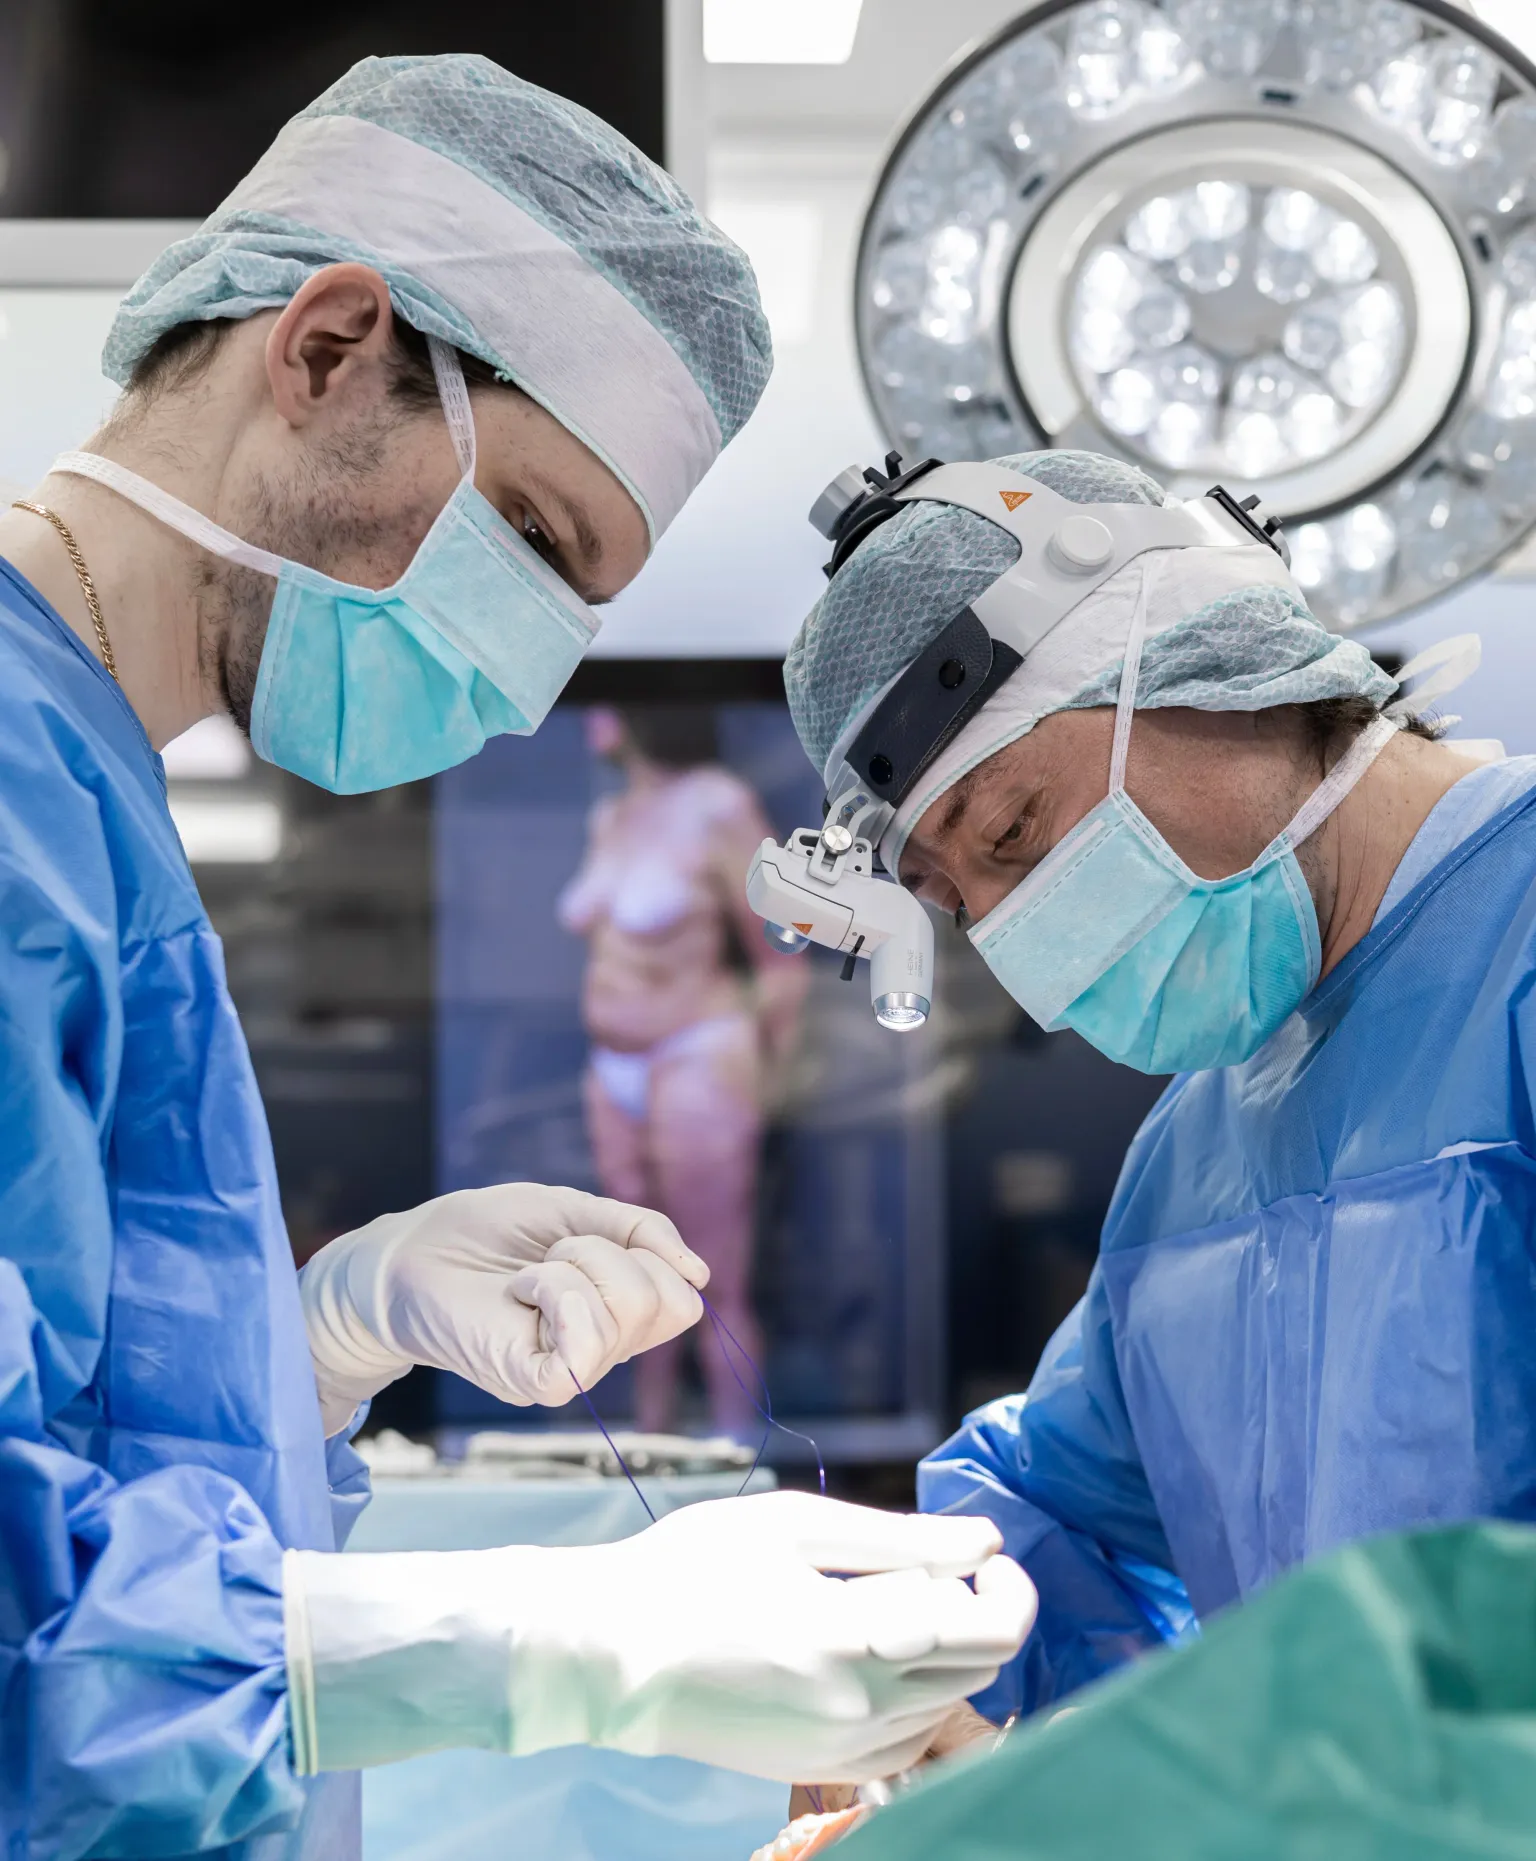 Mastopexy operation in Moscow